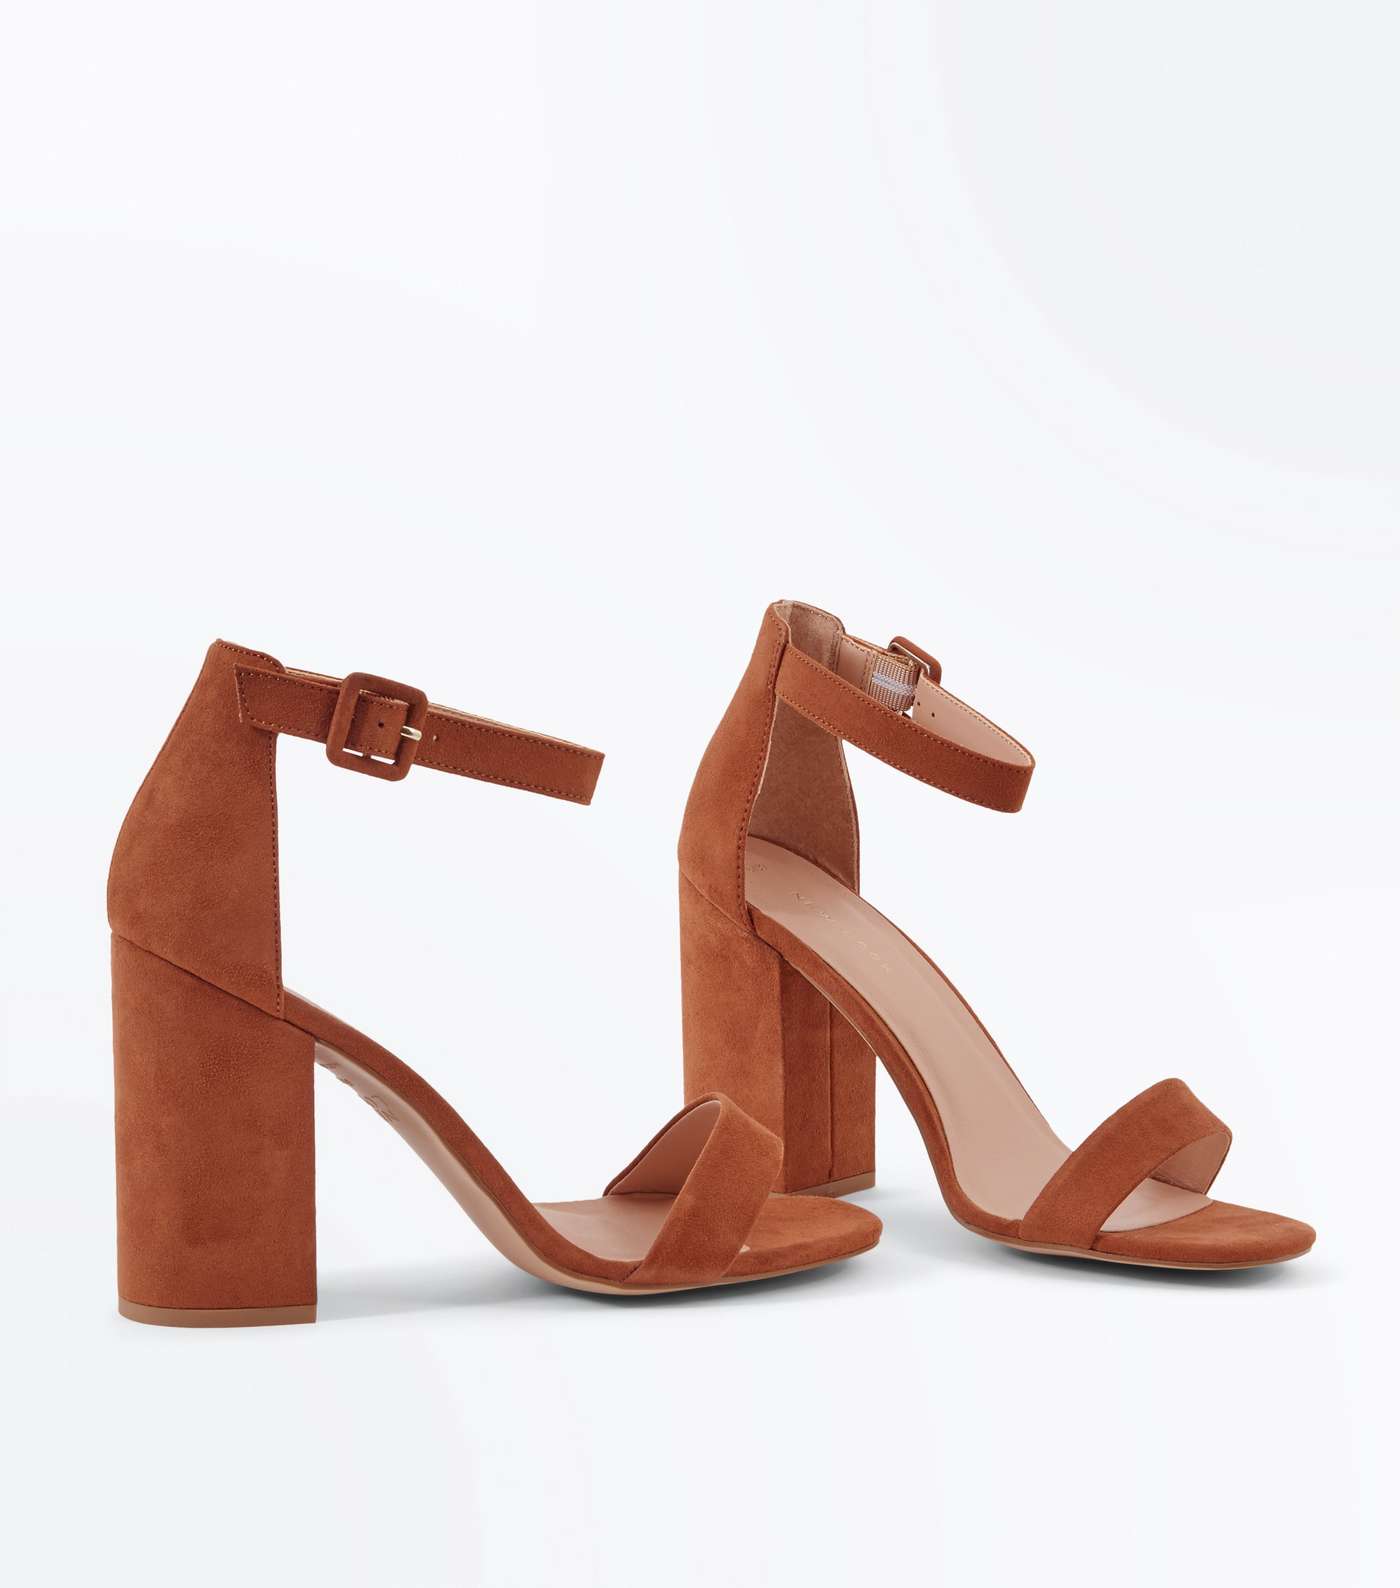 Tan Suedette Barely There Block Heels Image 4